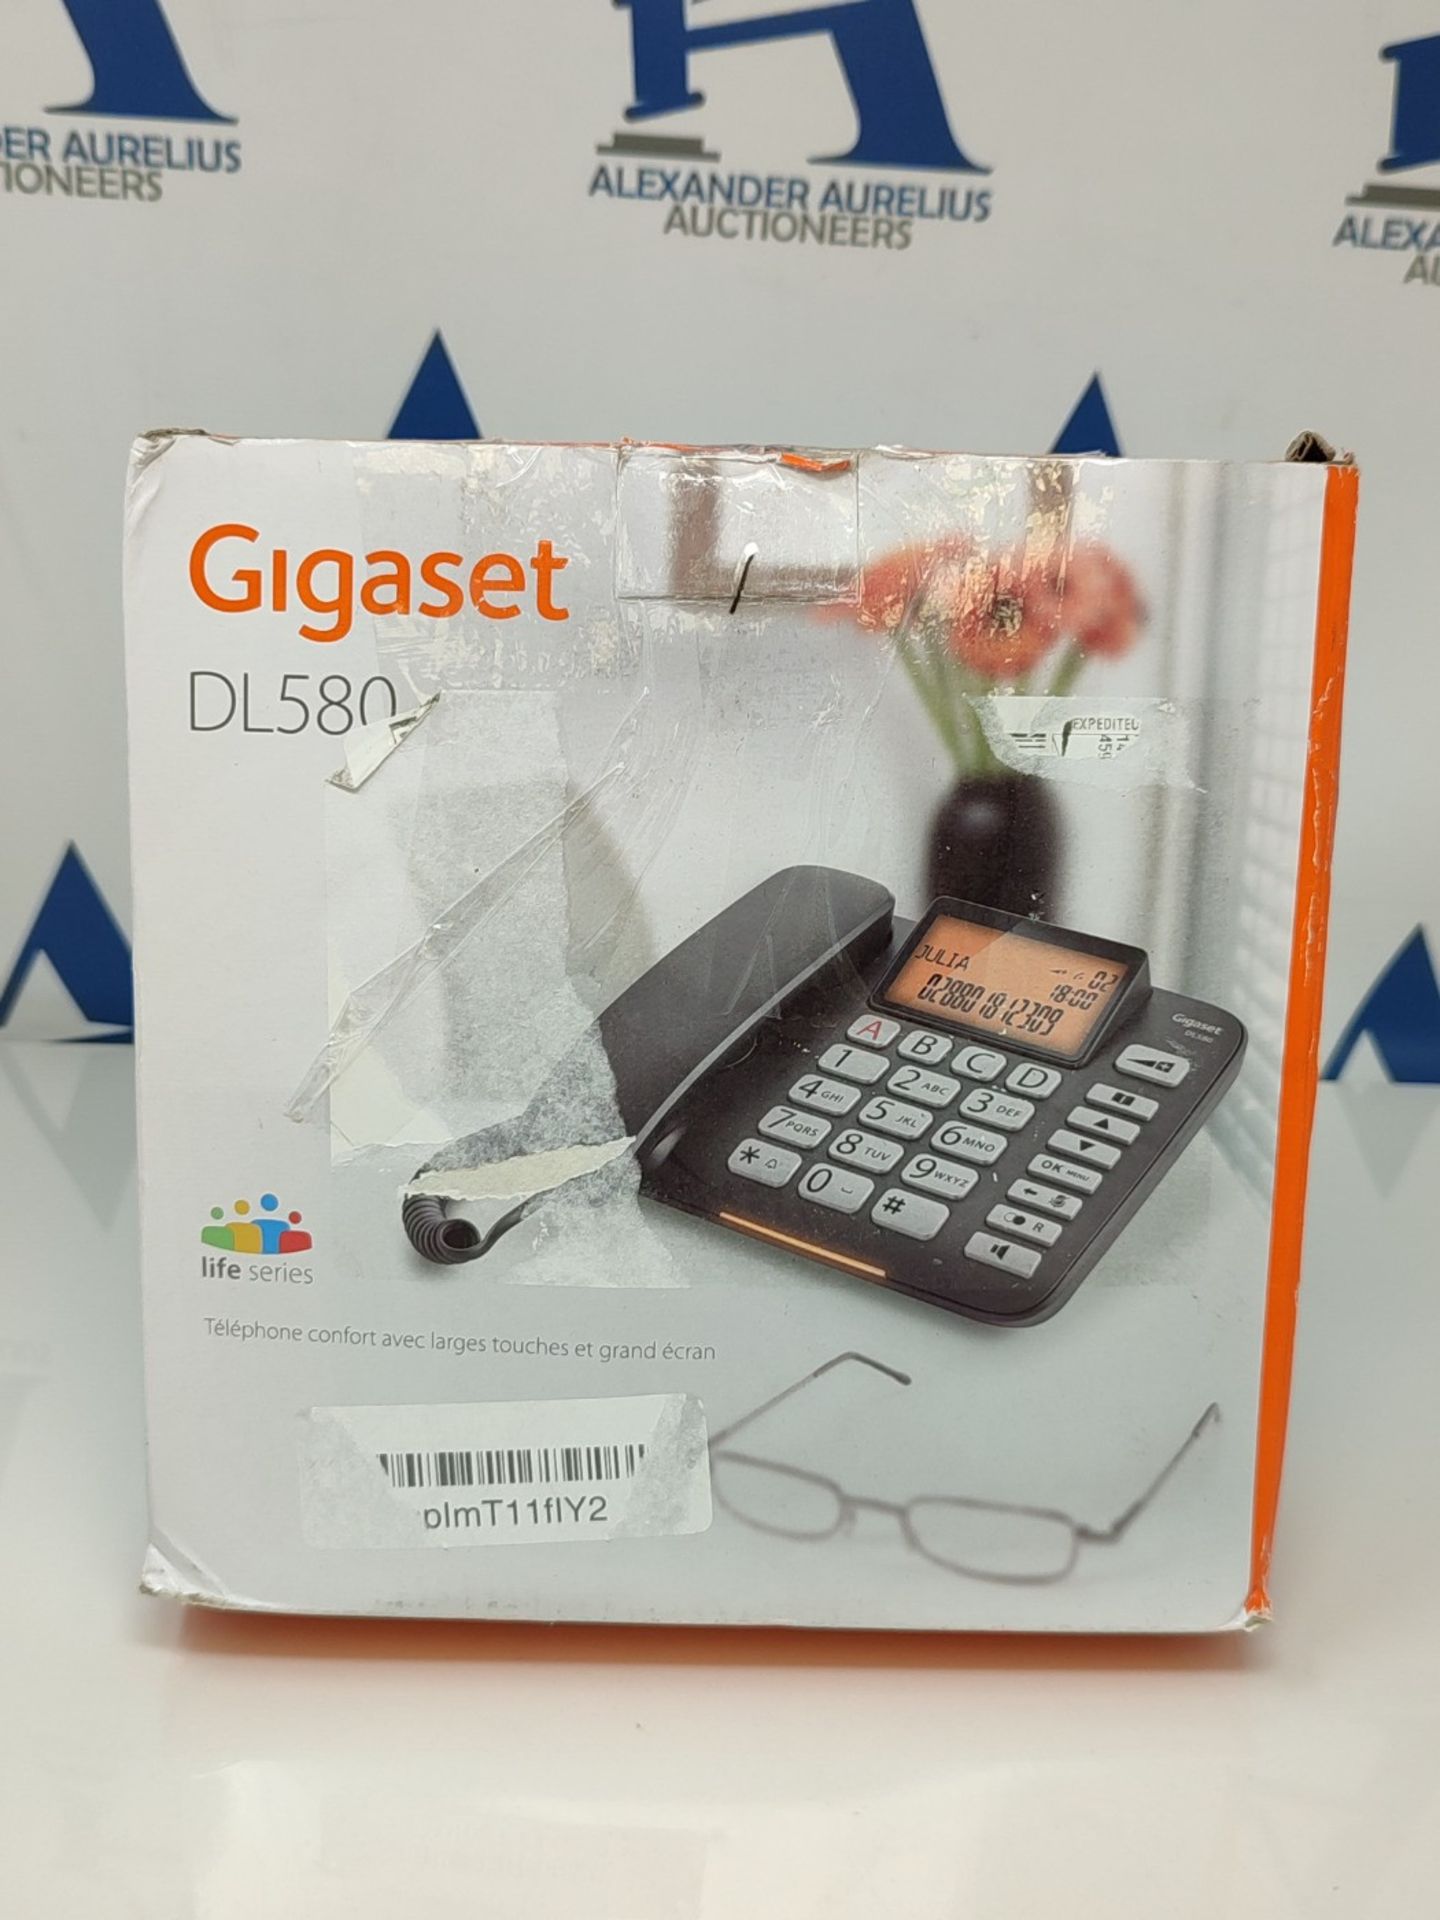 Gigaset DL580 Corded Telephone Black [French Version] - Image 3 of 6